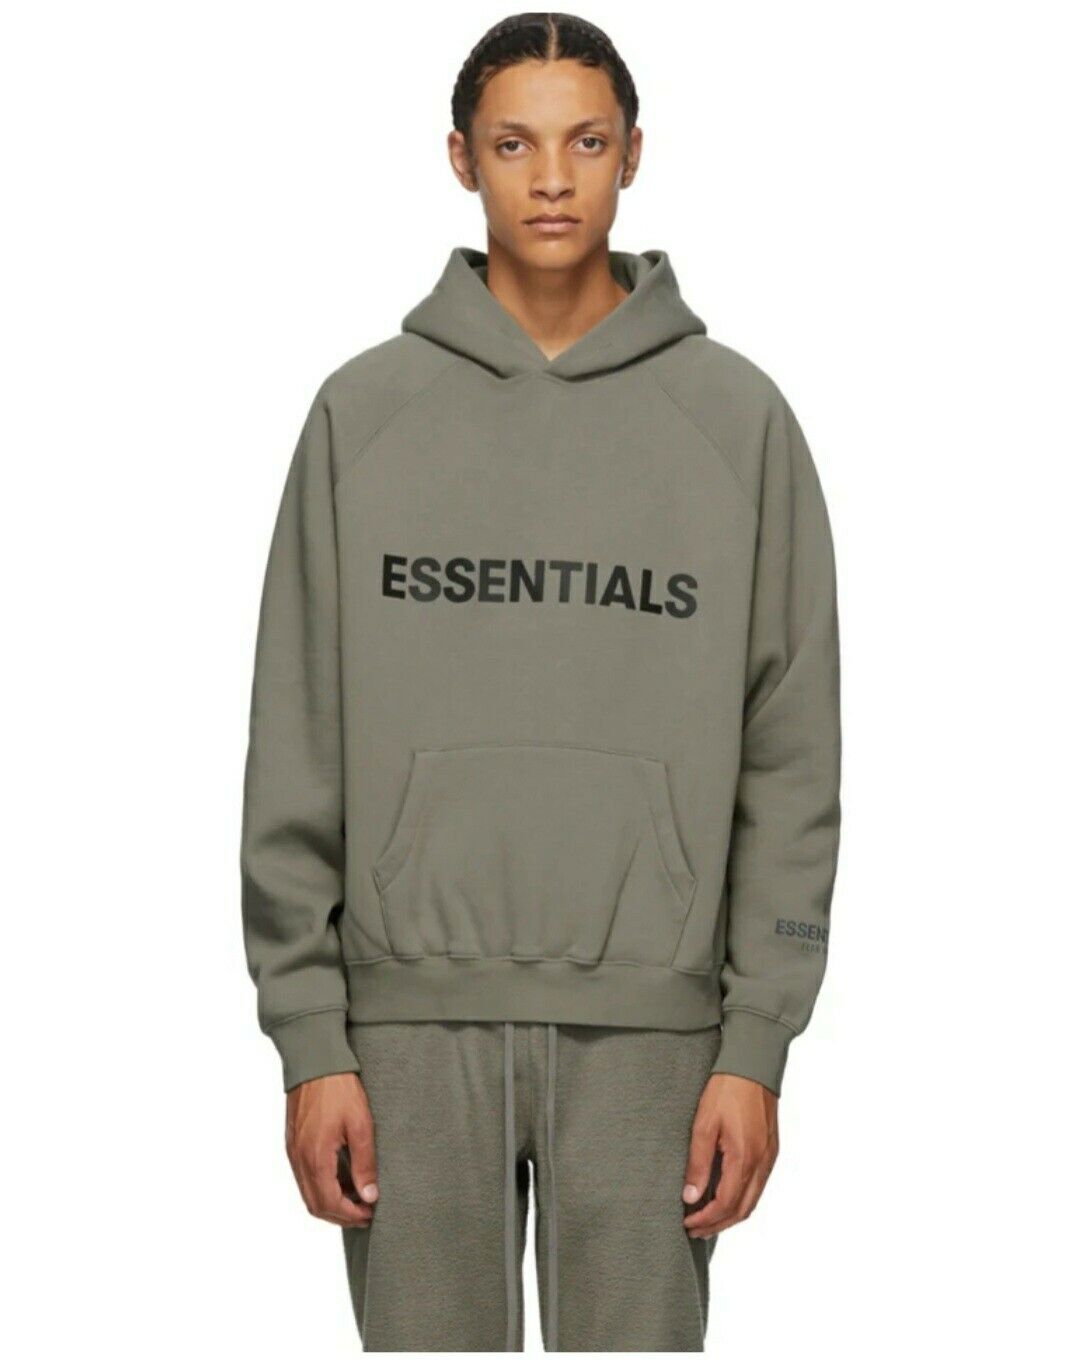 Fear of God Essentials Pullover Hoodie Charcoal